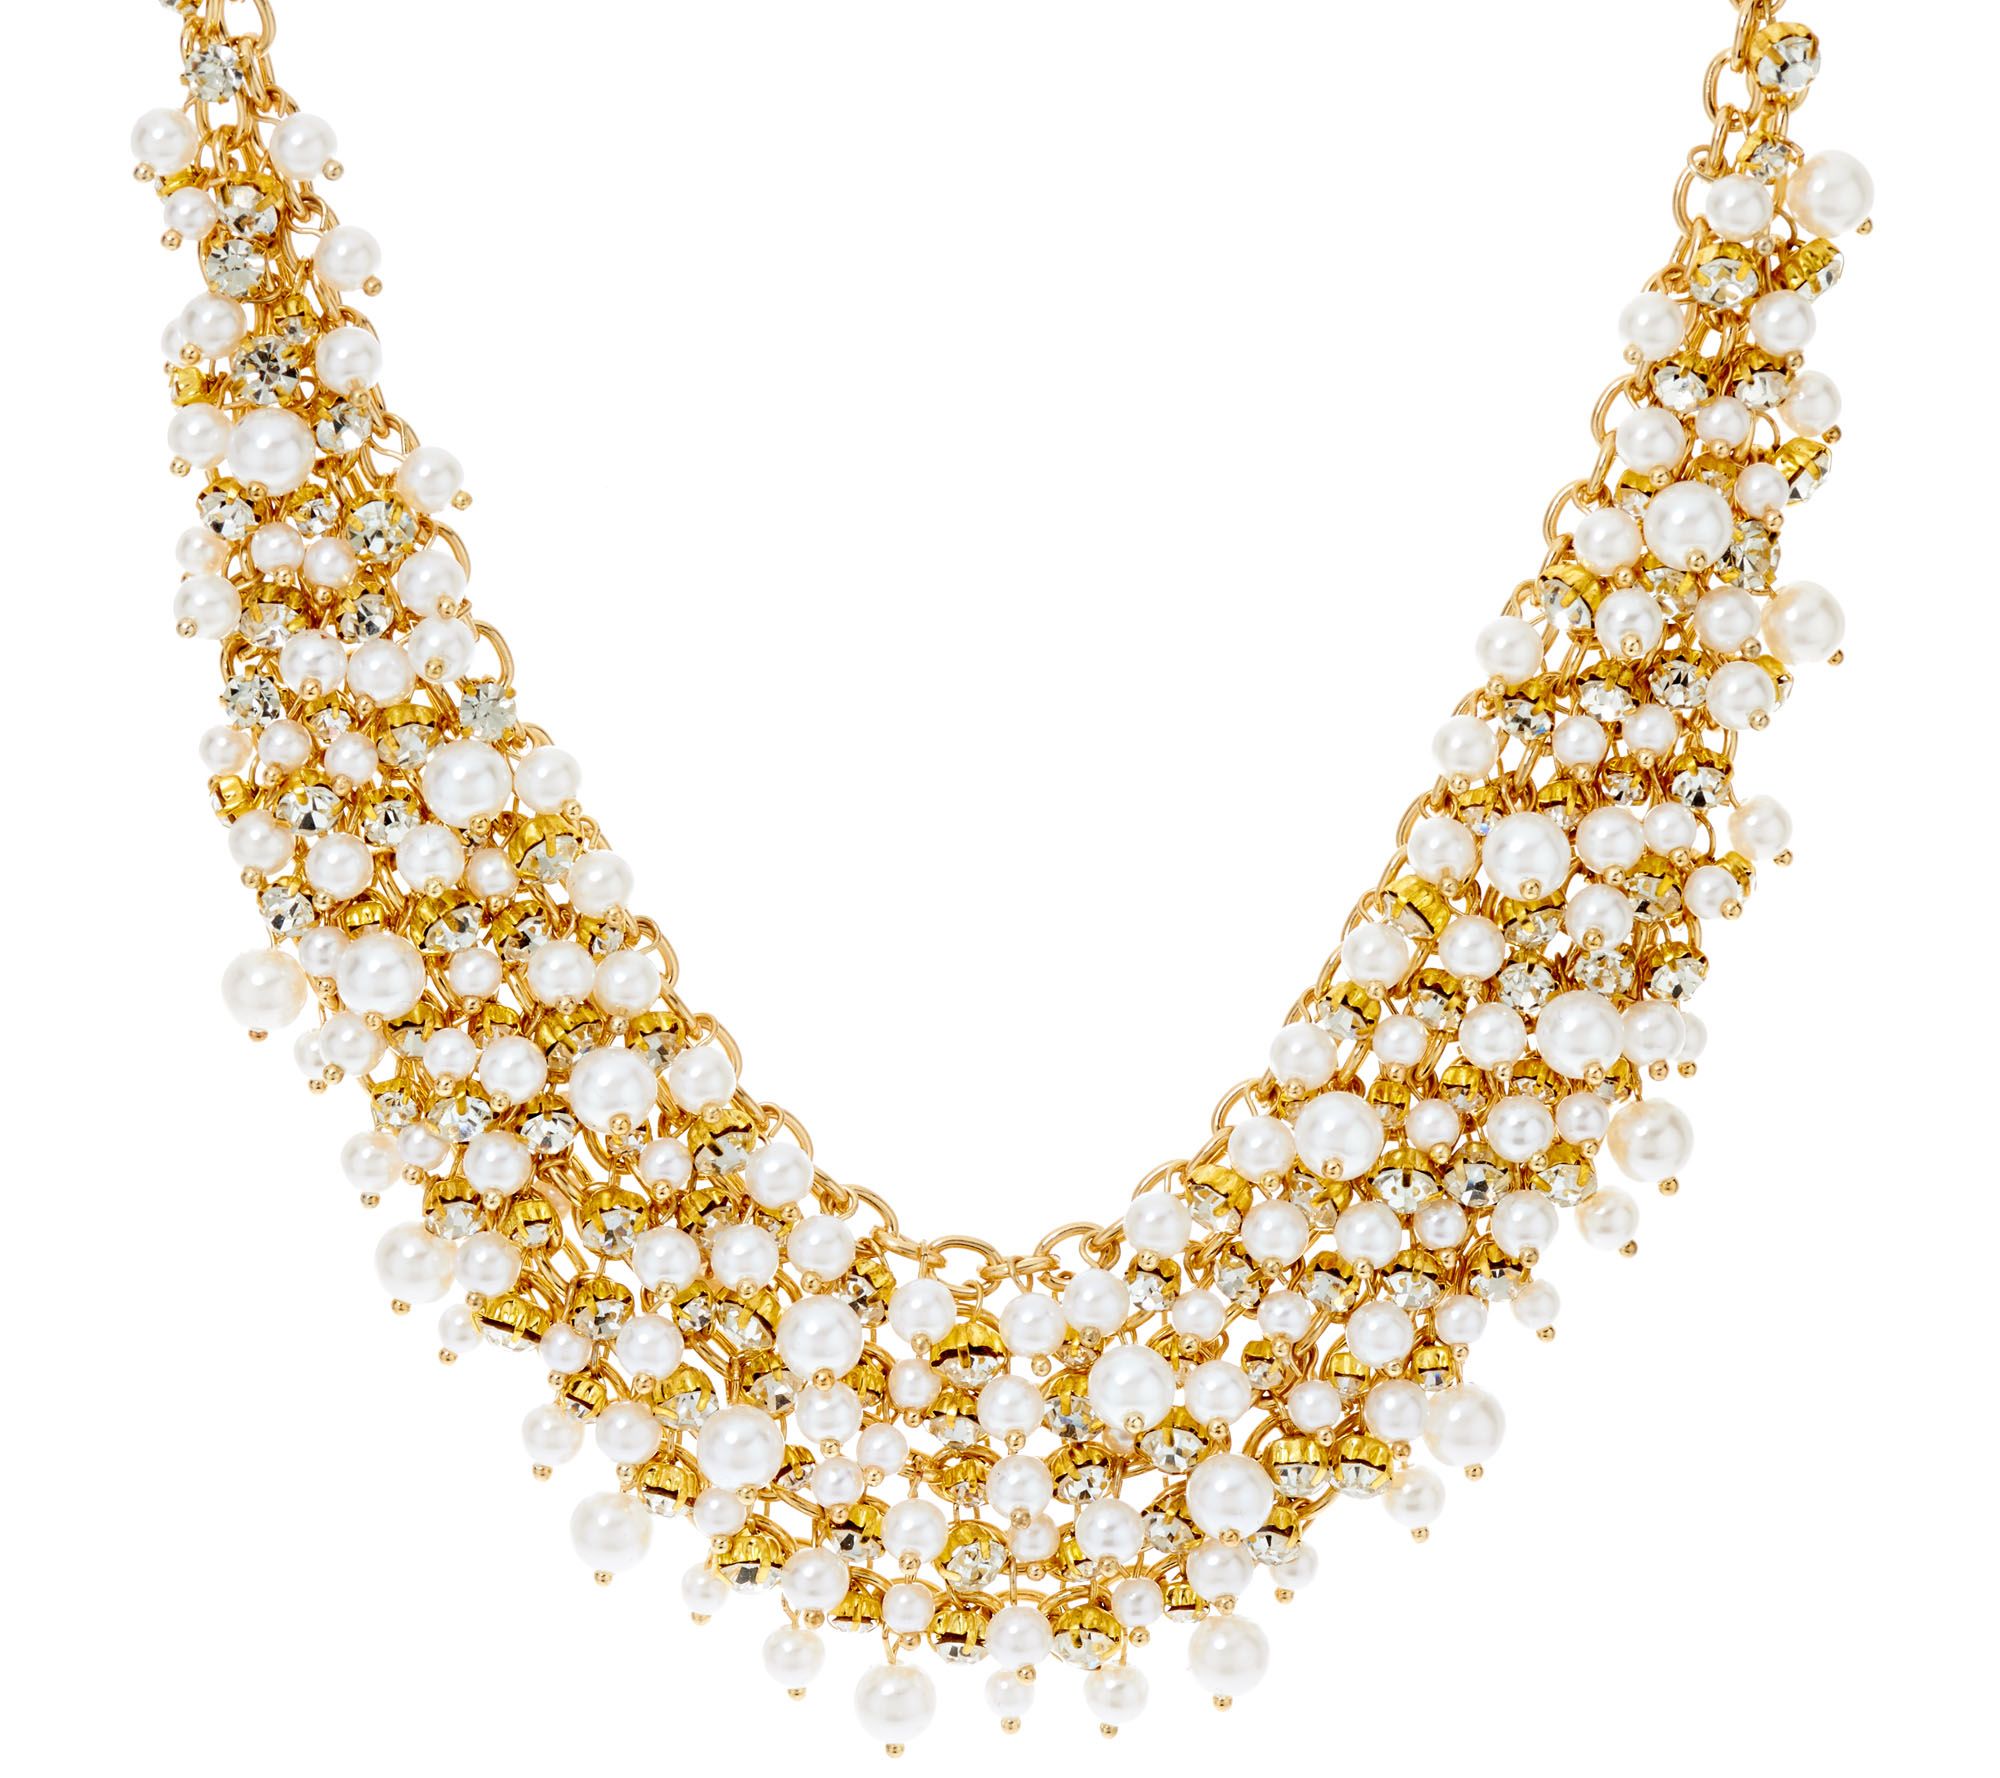 Crystal and Simulated Pearl Goldtone Bib Necklace - QVC.com